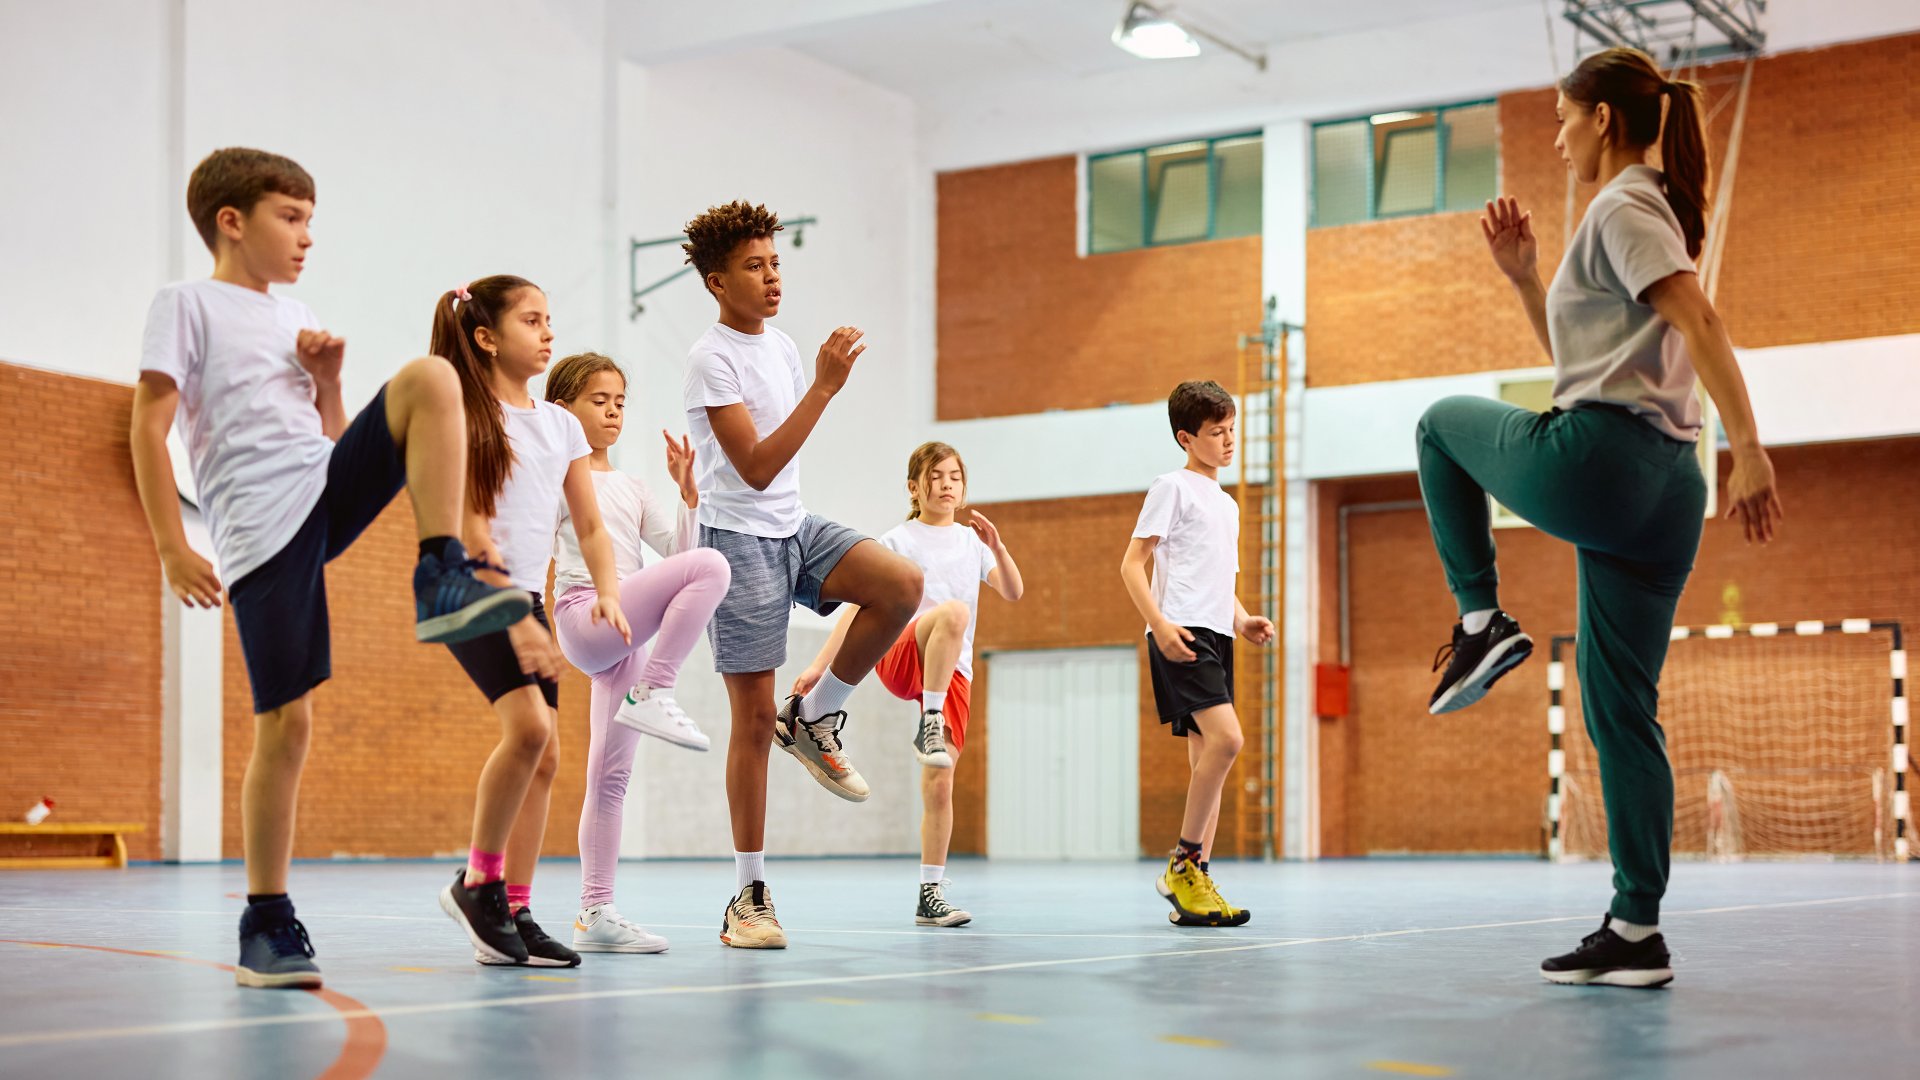 PE at school isn't like adult exercise – but maybe it should be